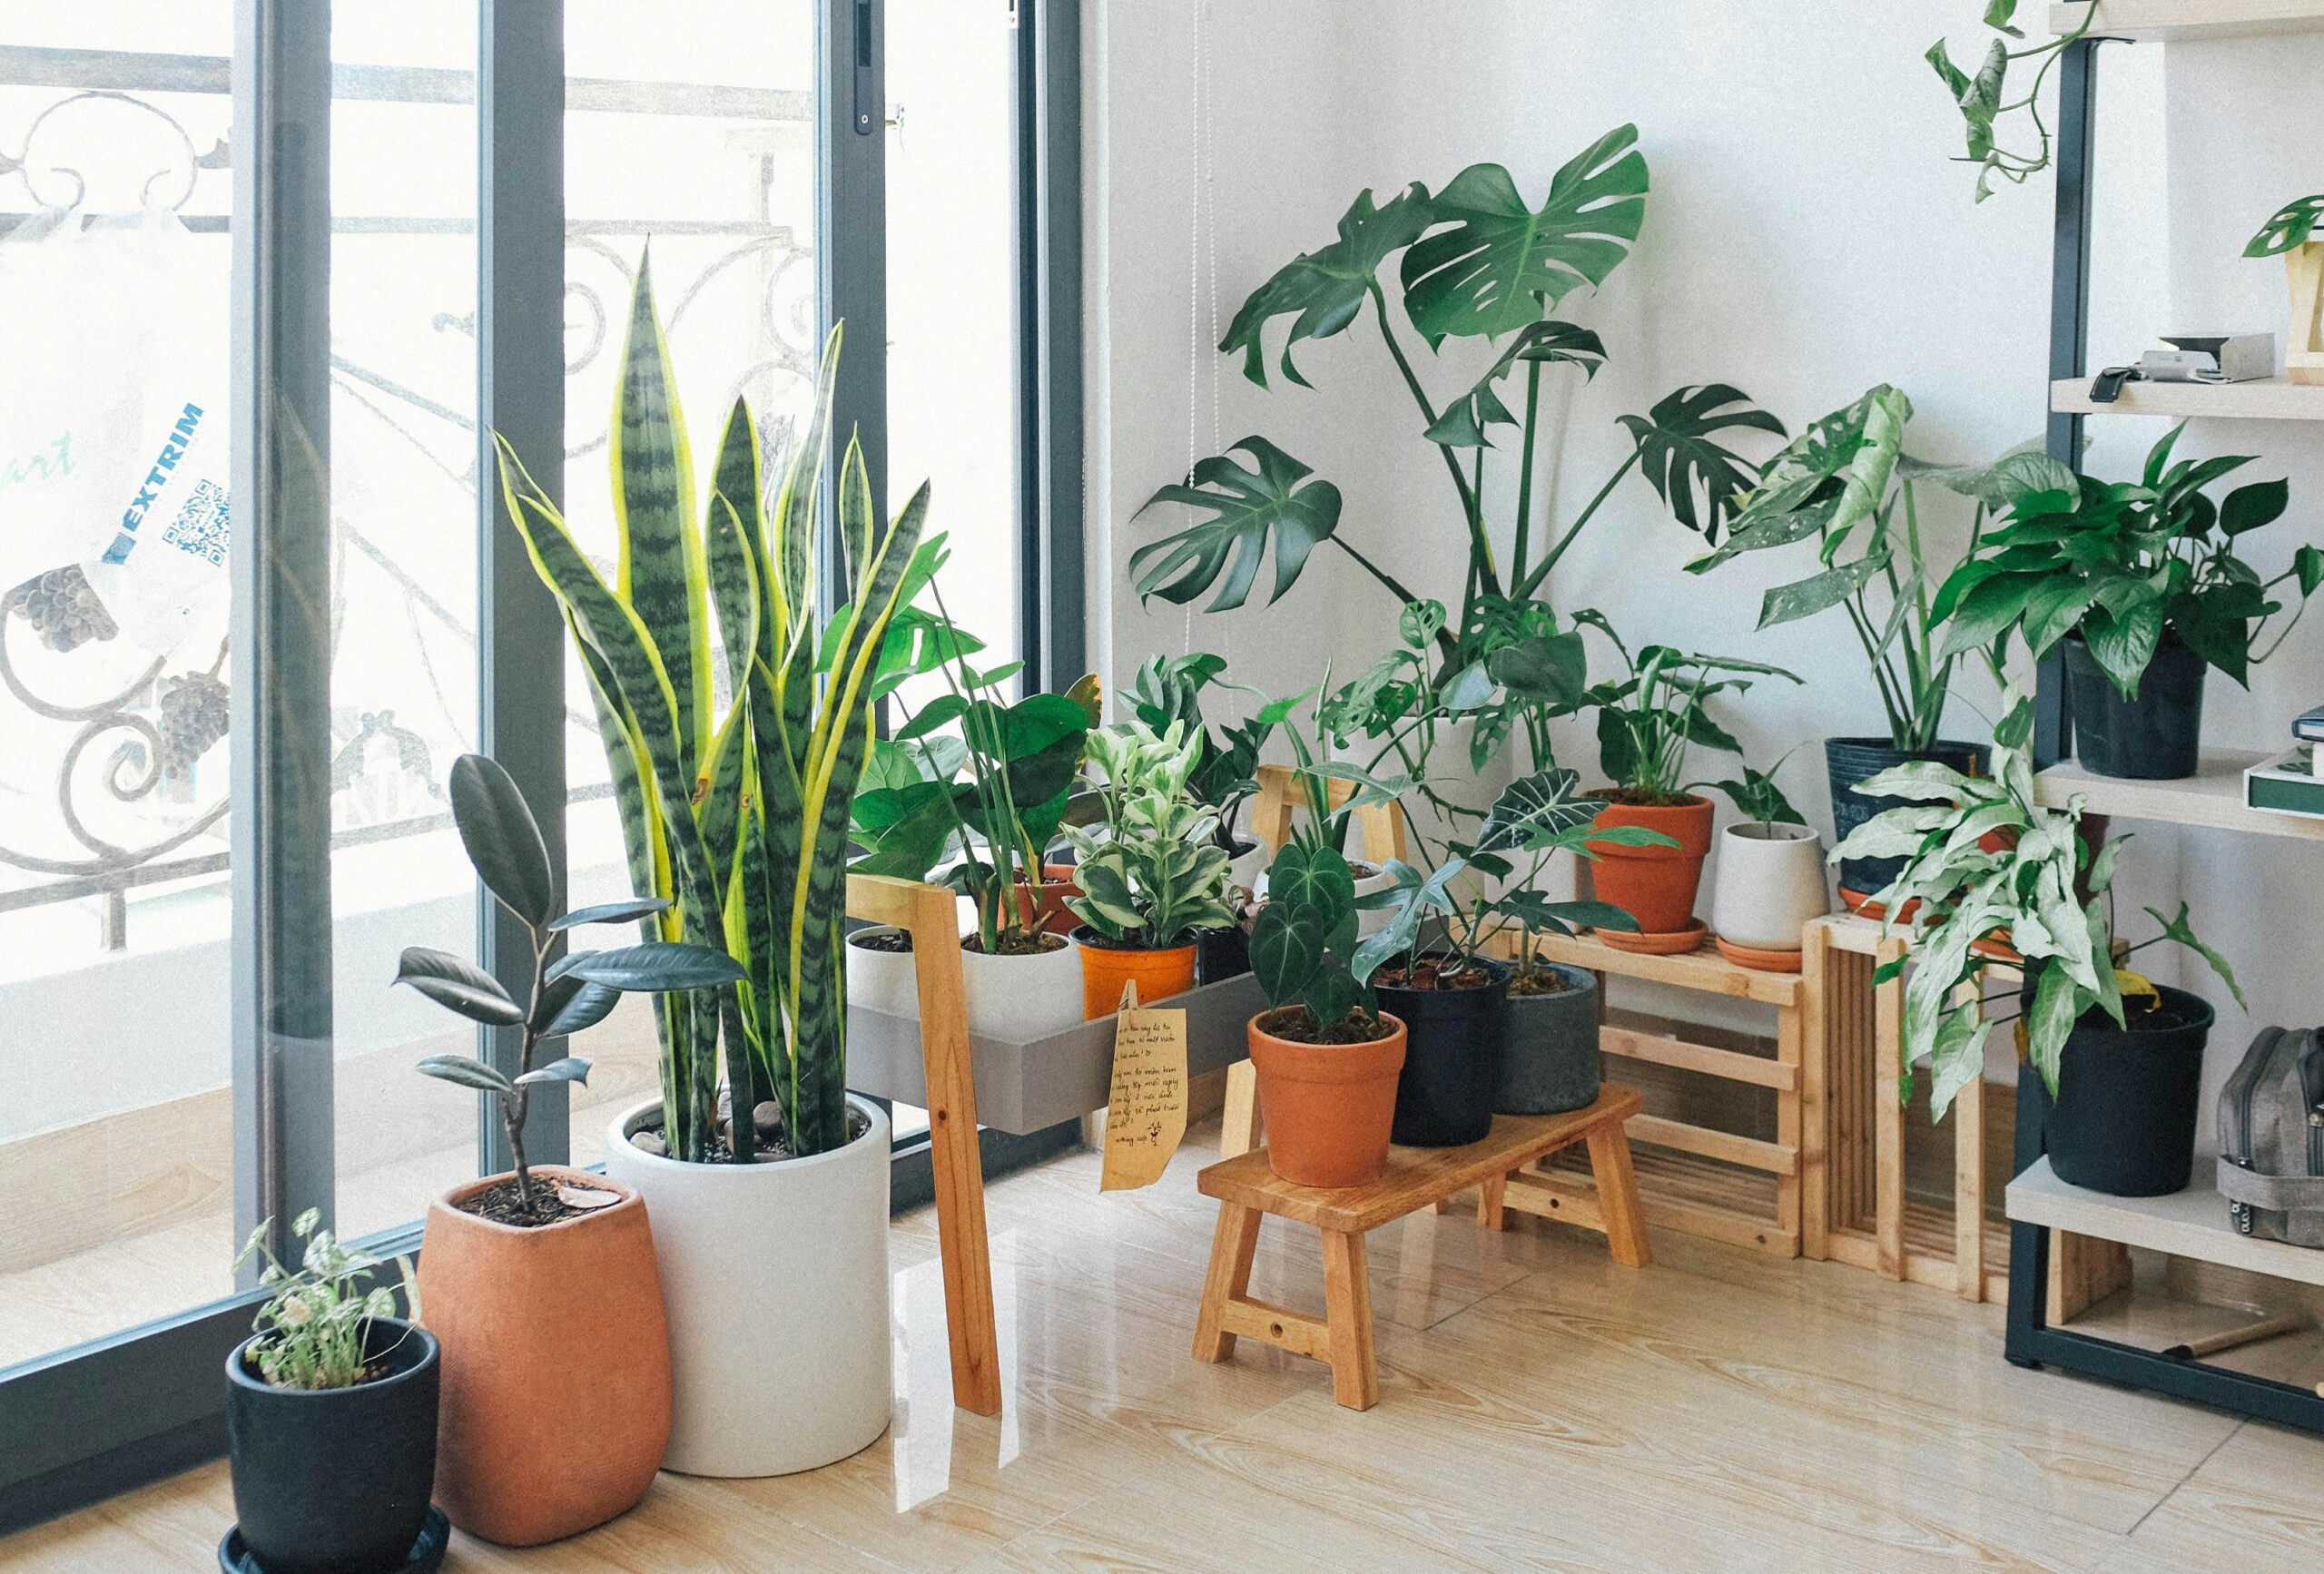 Plants are the most important element to a biophilic design style. Pictured: A living room full of plants